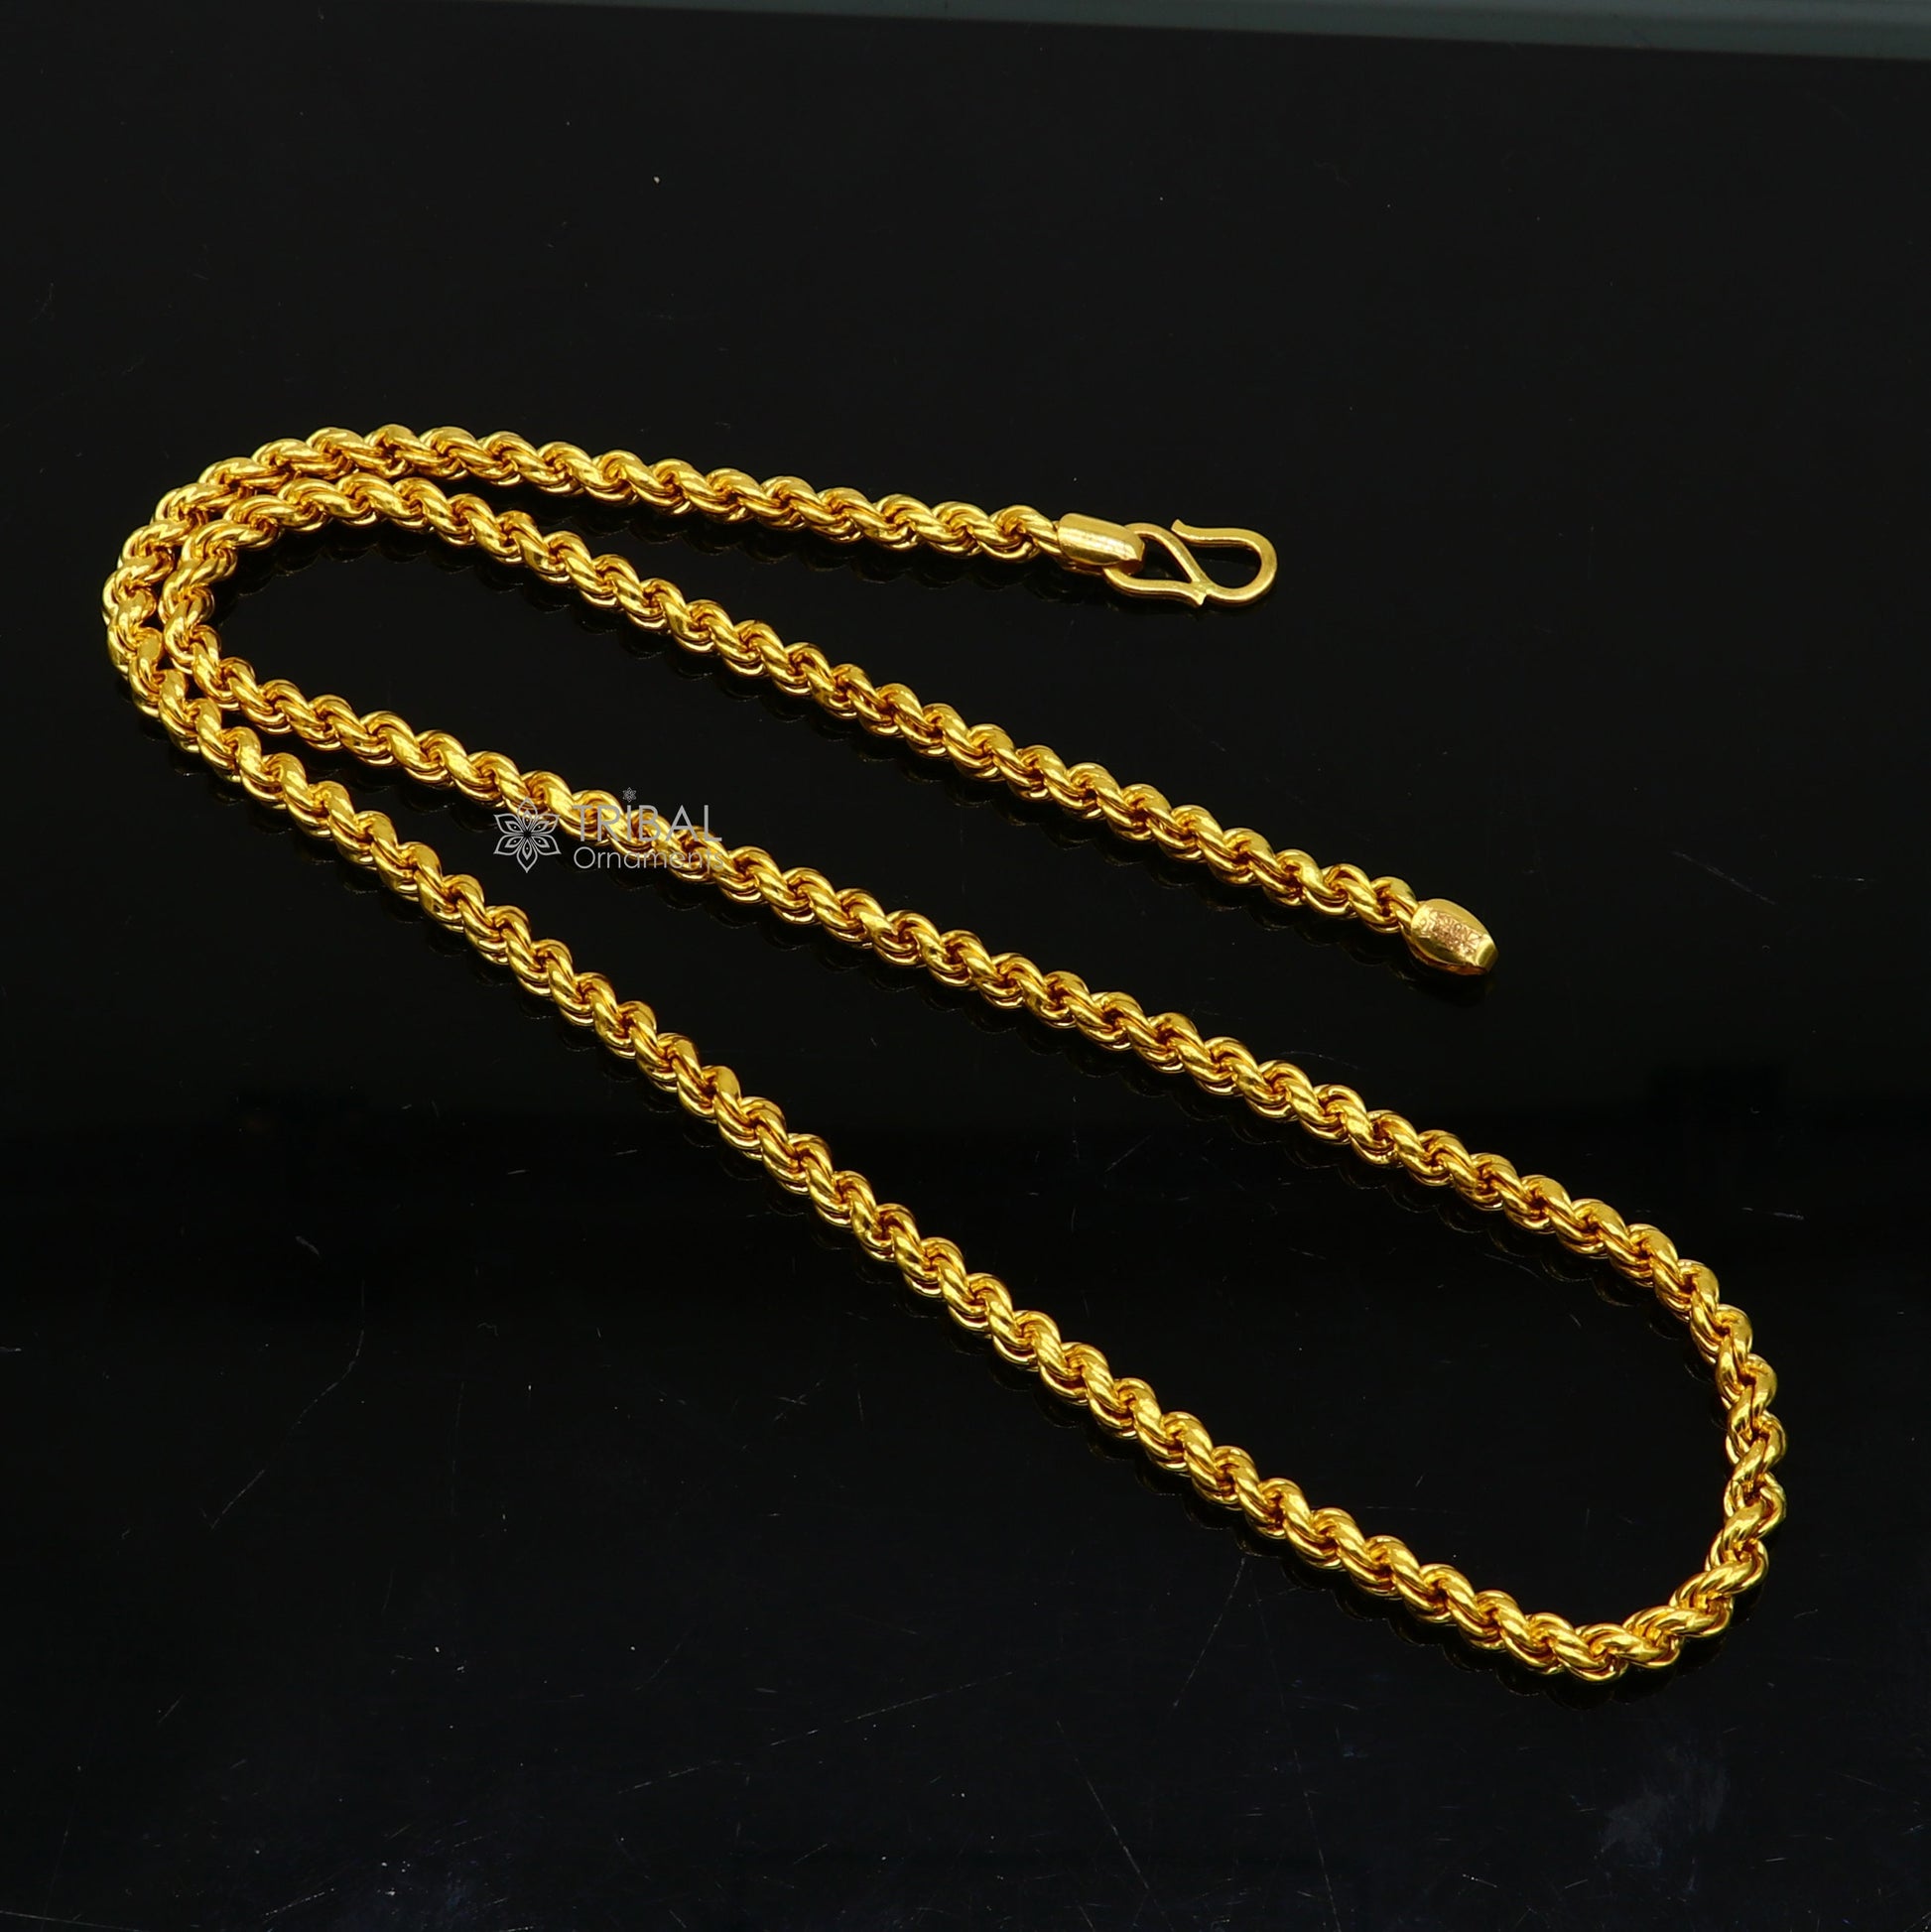 4mm 22k yellow gold handmade fabulous Rope chain necklace excellent gold unisex chain certified best gifting jewelry gch587 24